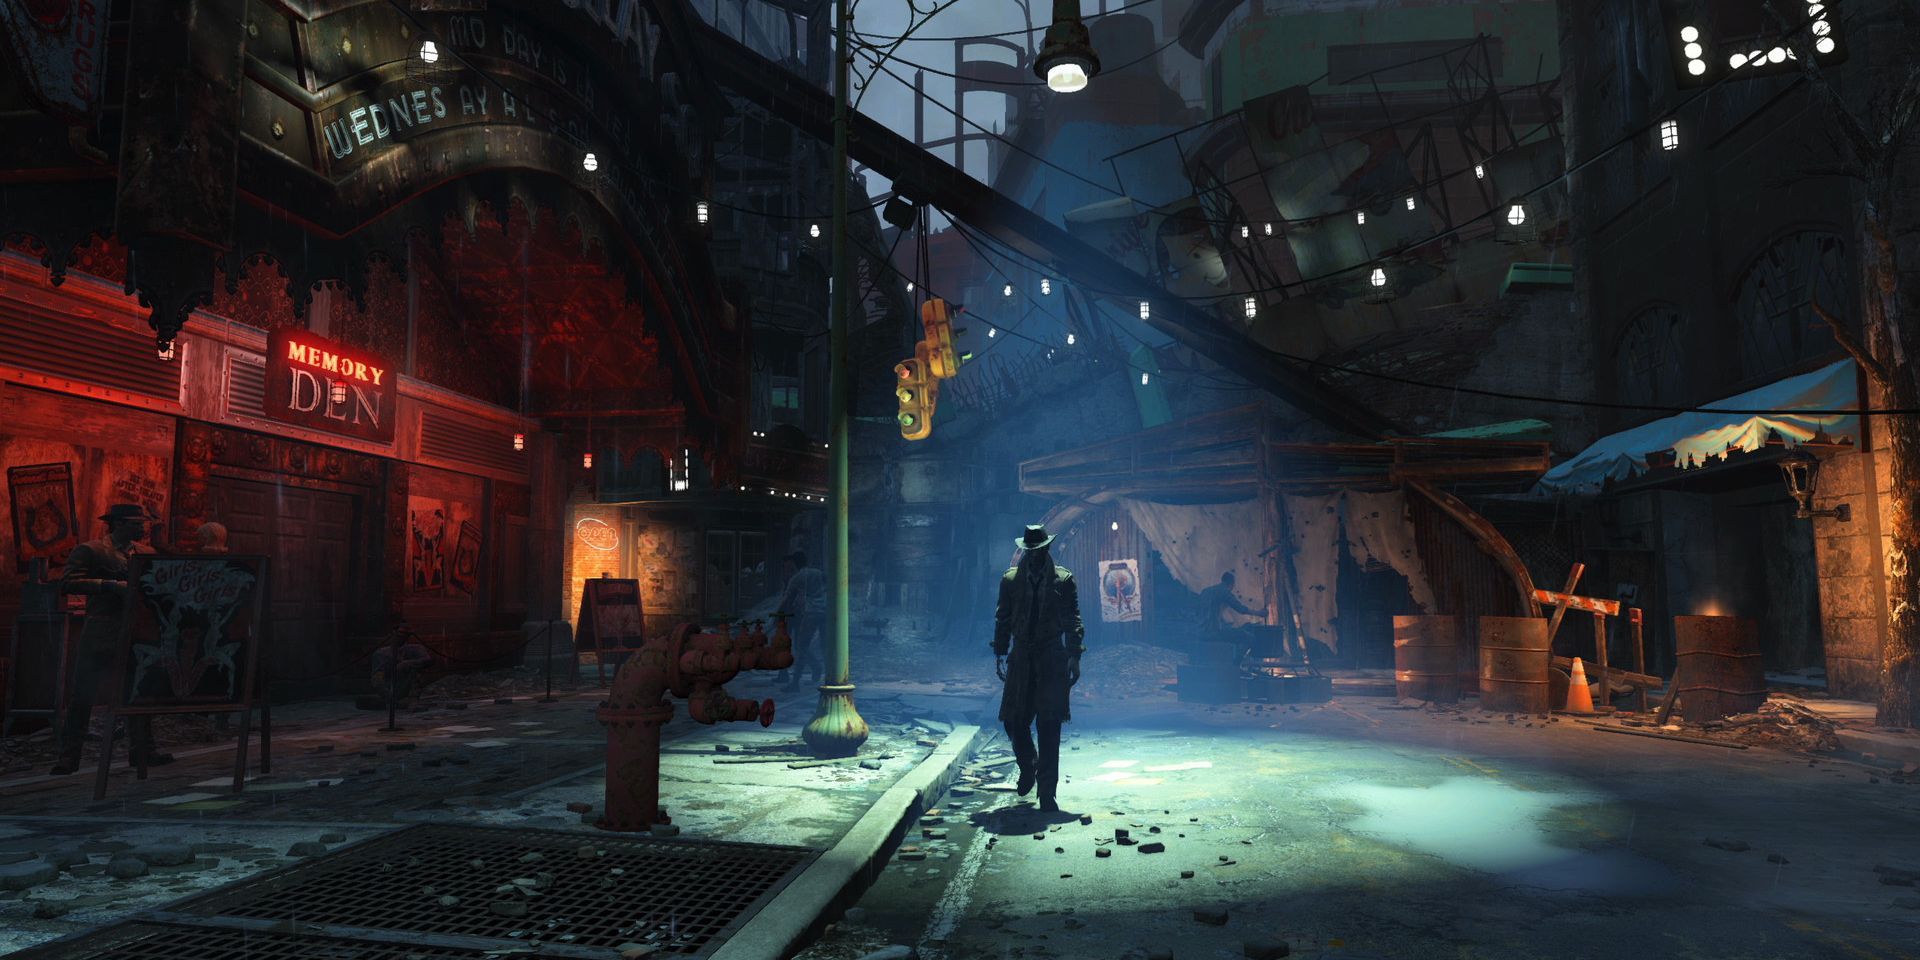 The synth detective, Nick Valentine, walking in the shadows in Fallout 4